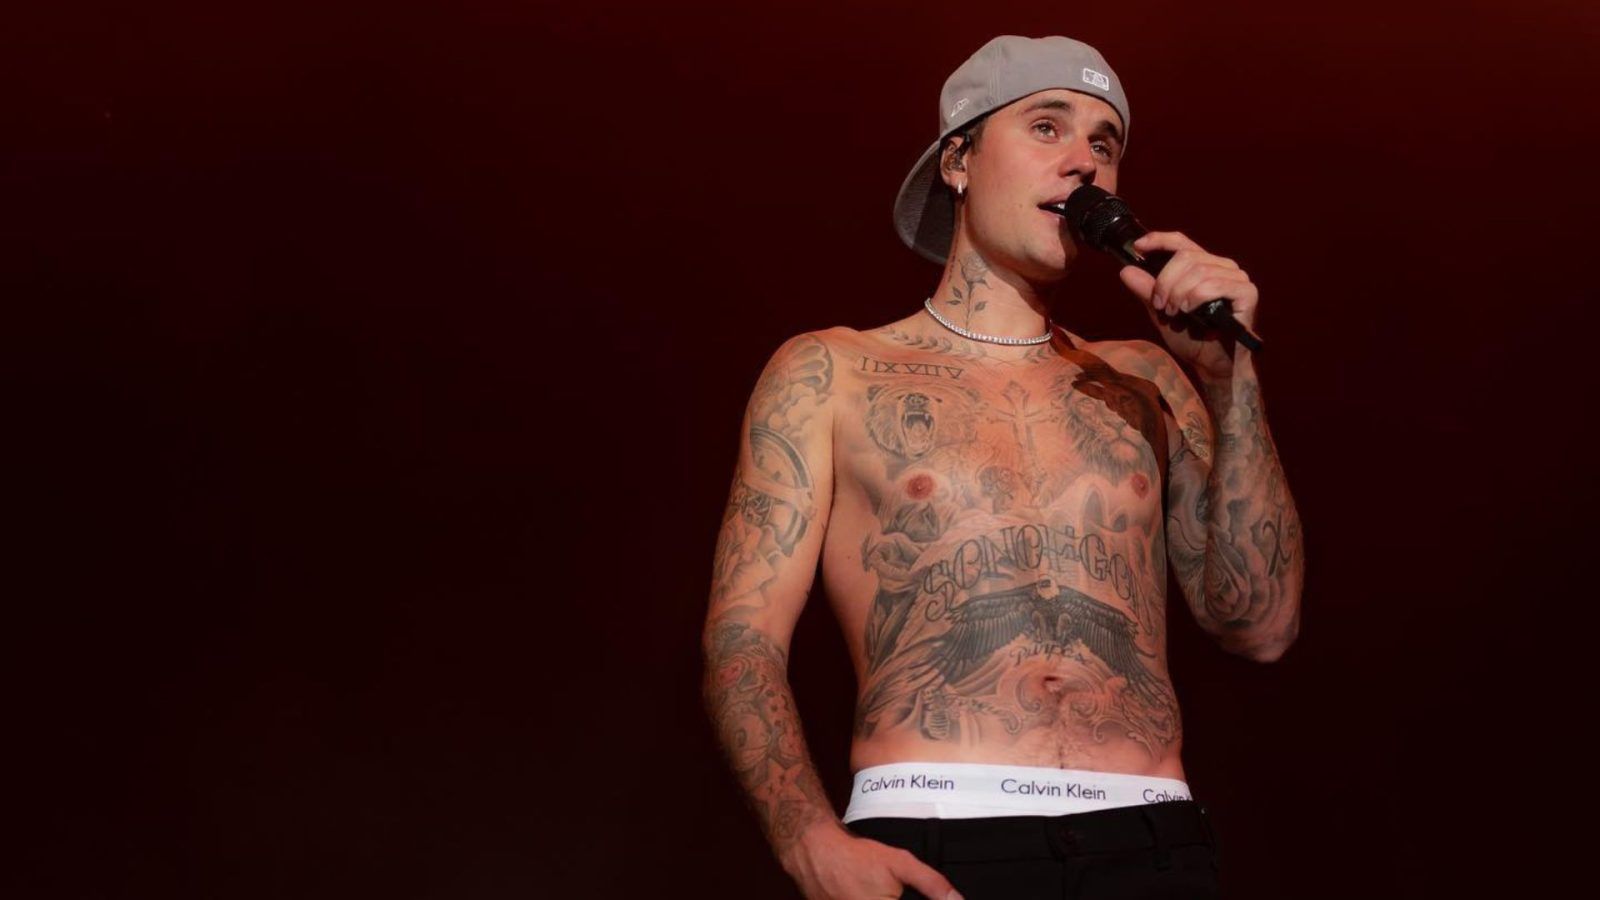 Justin Bieber's net worth Career, brand deals and expensive assets